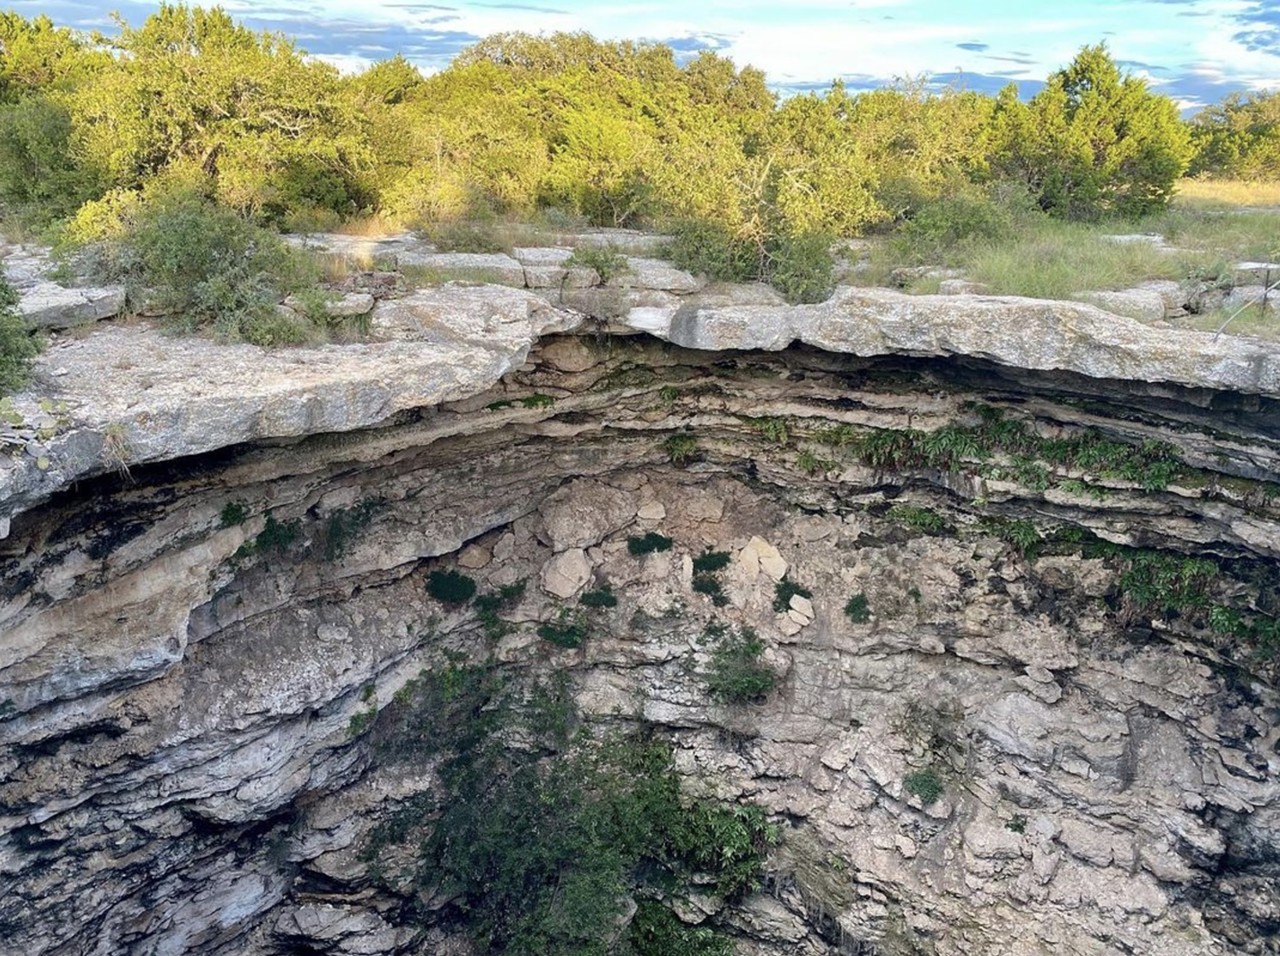 Devil's Sinkhole State Natural Area
101 N. Sweeten St., Rocksprings, (830) 683-2287, tpwd.texas.gov
Fans of the Mexican free-tailed bat should definitely plan a visit to the Devil’s Sinkhole, a natural bat habitat. The national natural landmark houses one of the state’s largest colonies of bats of this kind. And here’s another reason why this spot is so badass: the enormous cavern is vertical, meaning that the bats literally fly out of the ground. Official bat tours are held from May-October each year.
Photo via Instagram / tammiebernal